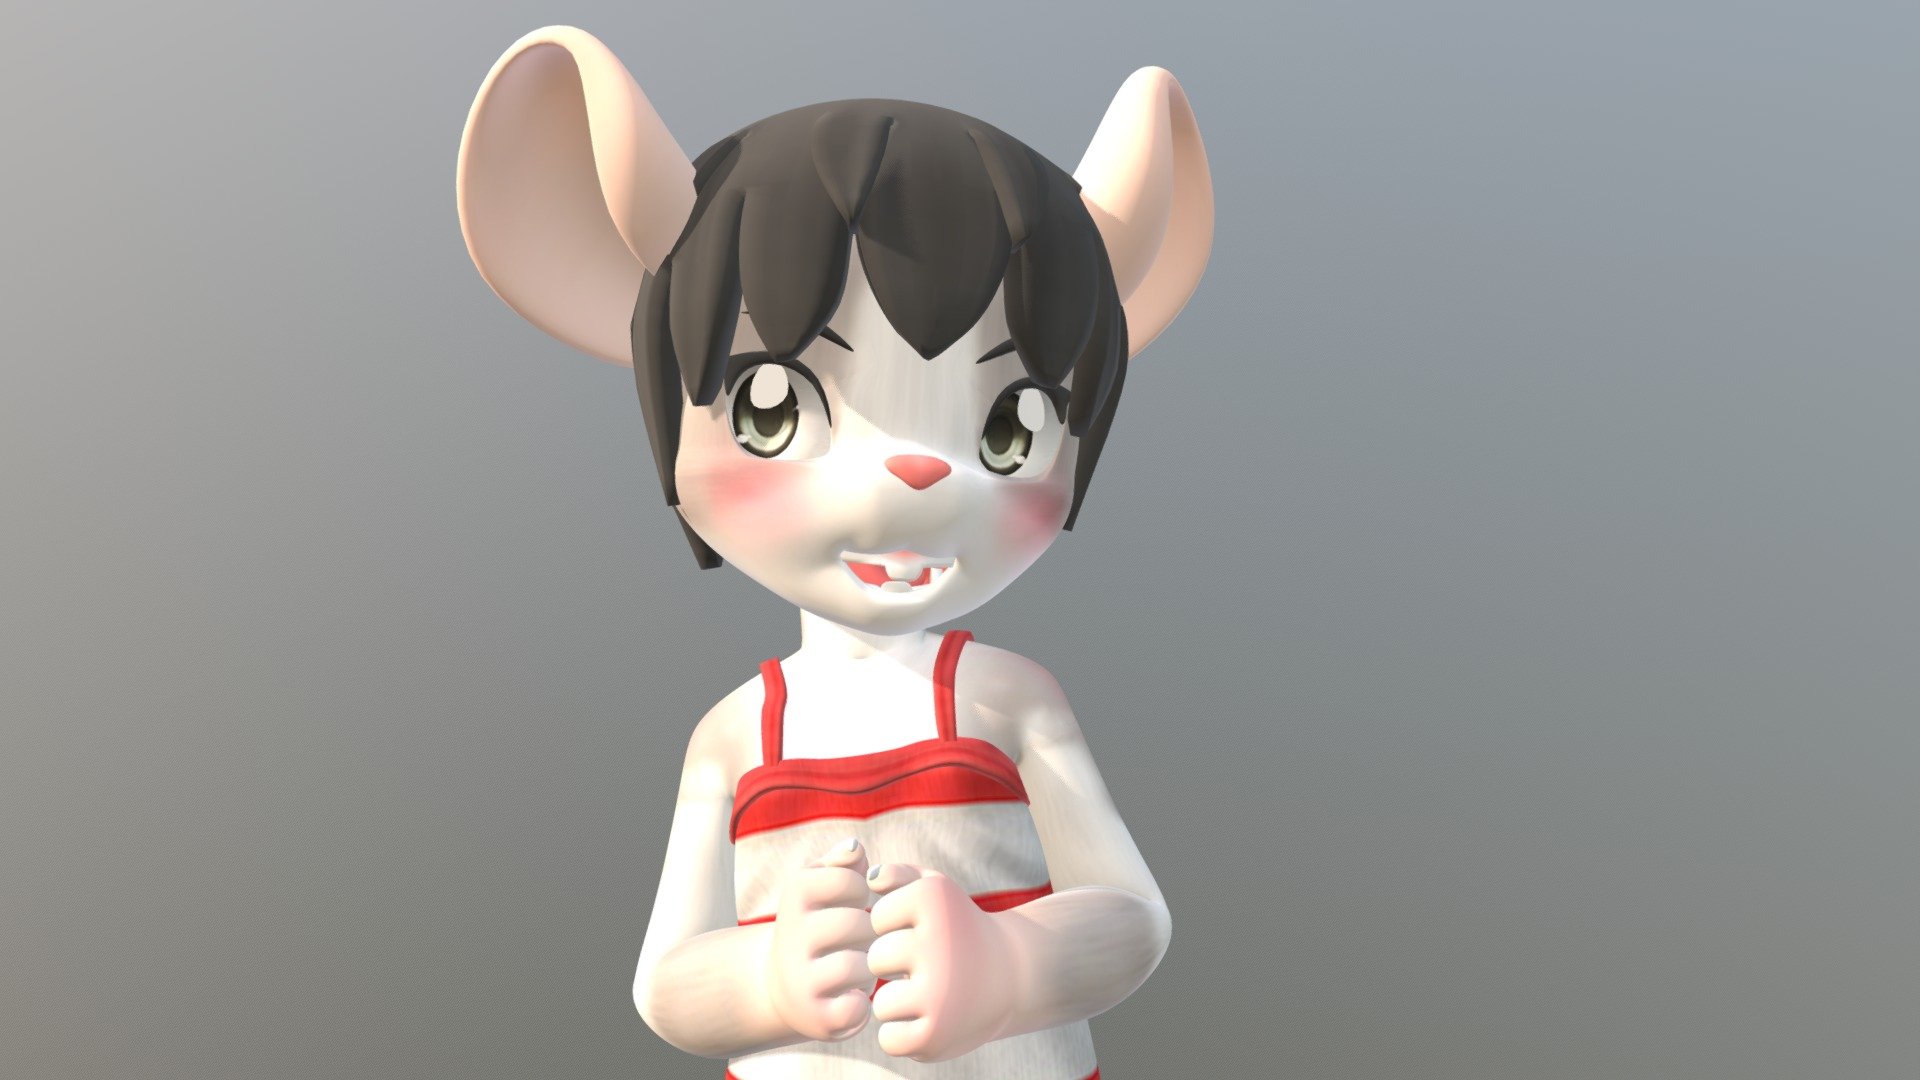 Original Character owned by me. 
Commissions: https://www.furaffinity.net/commissions/hickysnow/ - Topolina Pepe (Lina) - 3D model by HickySnow (@Hicky_Snow) 3d model